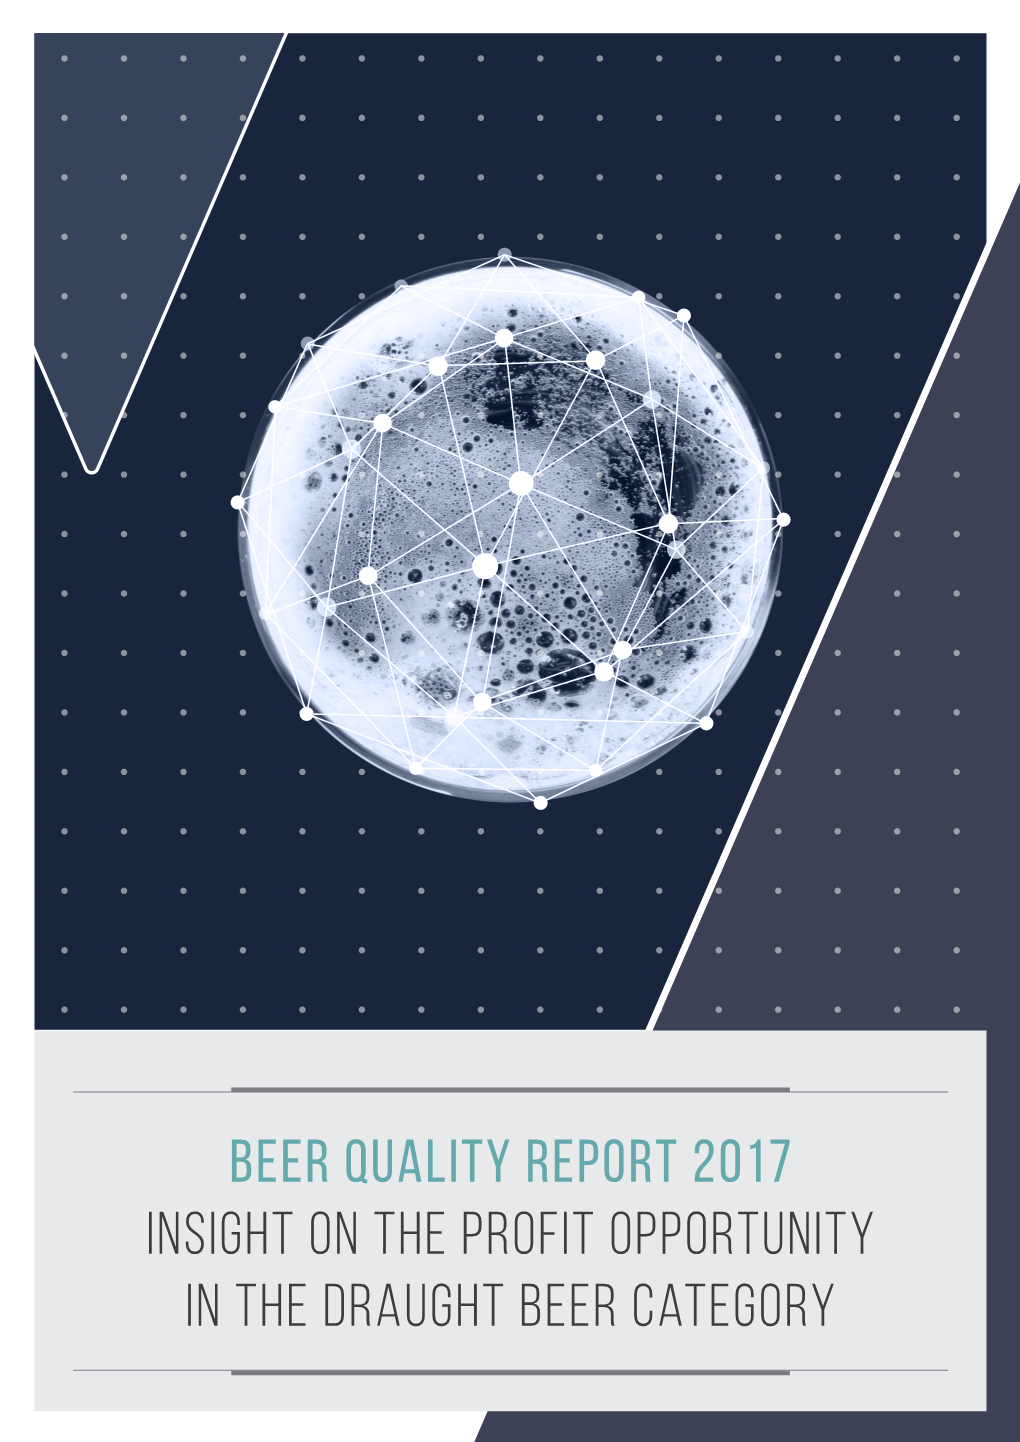 Beer Quality Report 2017 Insight on the Profit Opportunity in the Draught Beer Category an INSIGHT-LED APPROACH to IMPROVING QUALITY CONTENTS